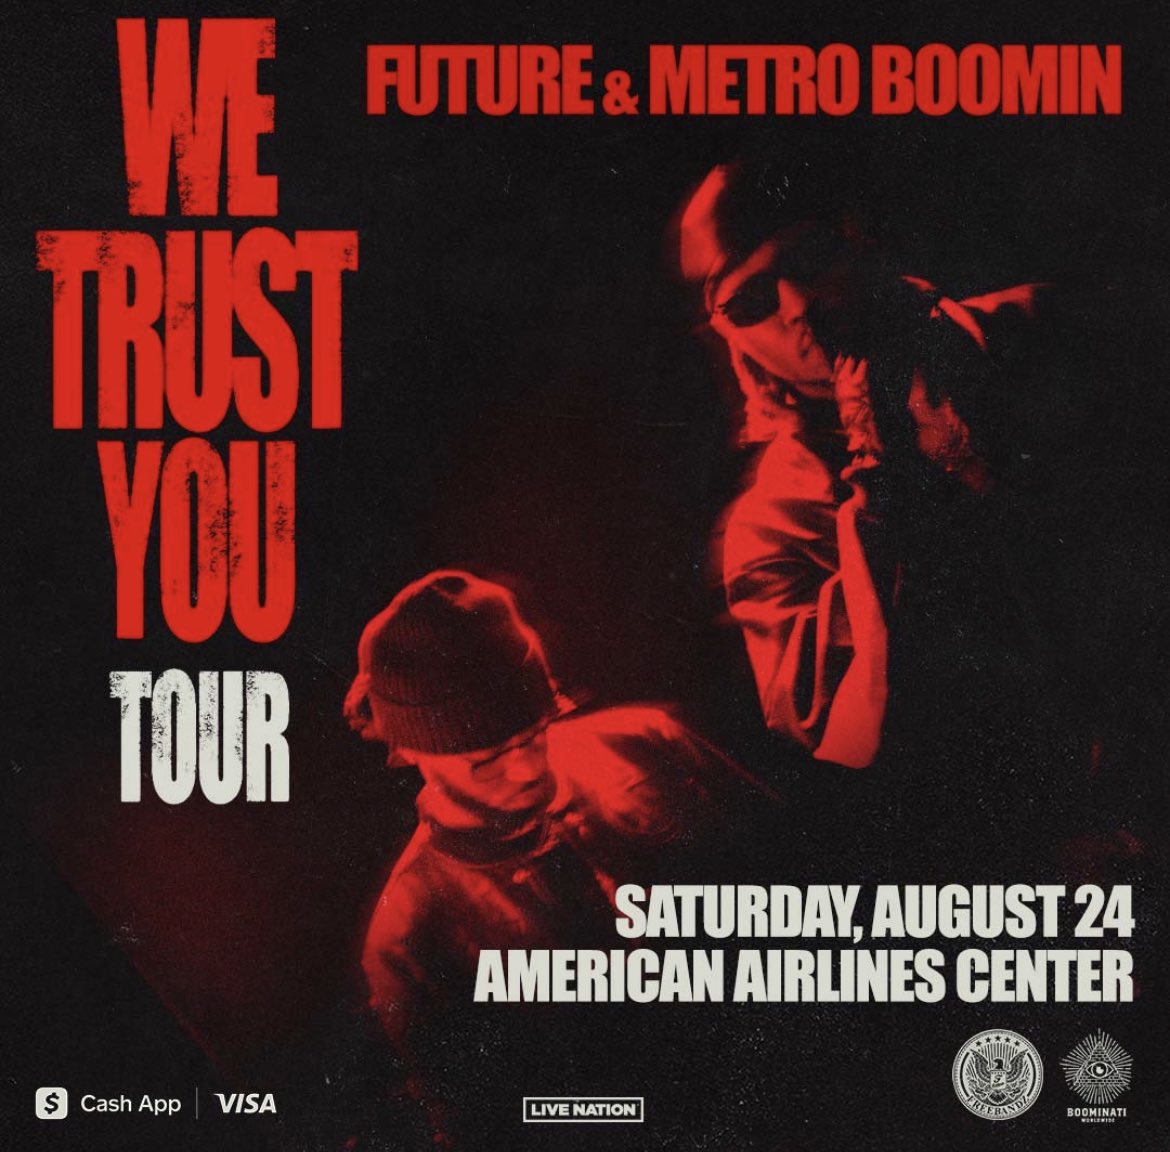 WE TRUST YOU TOUR

Future & Metro Boomin
🎤Saturday, August 24
📍AAC

tickets: on our website (link in bio)